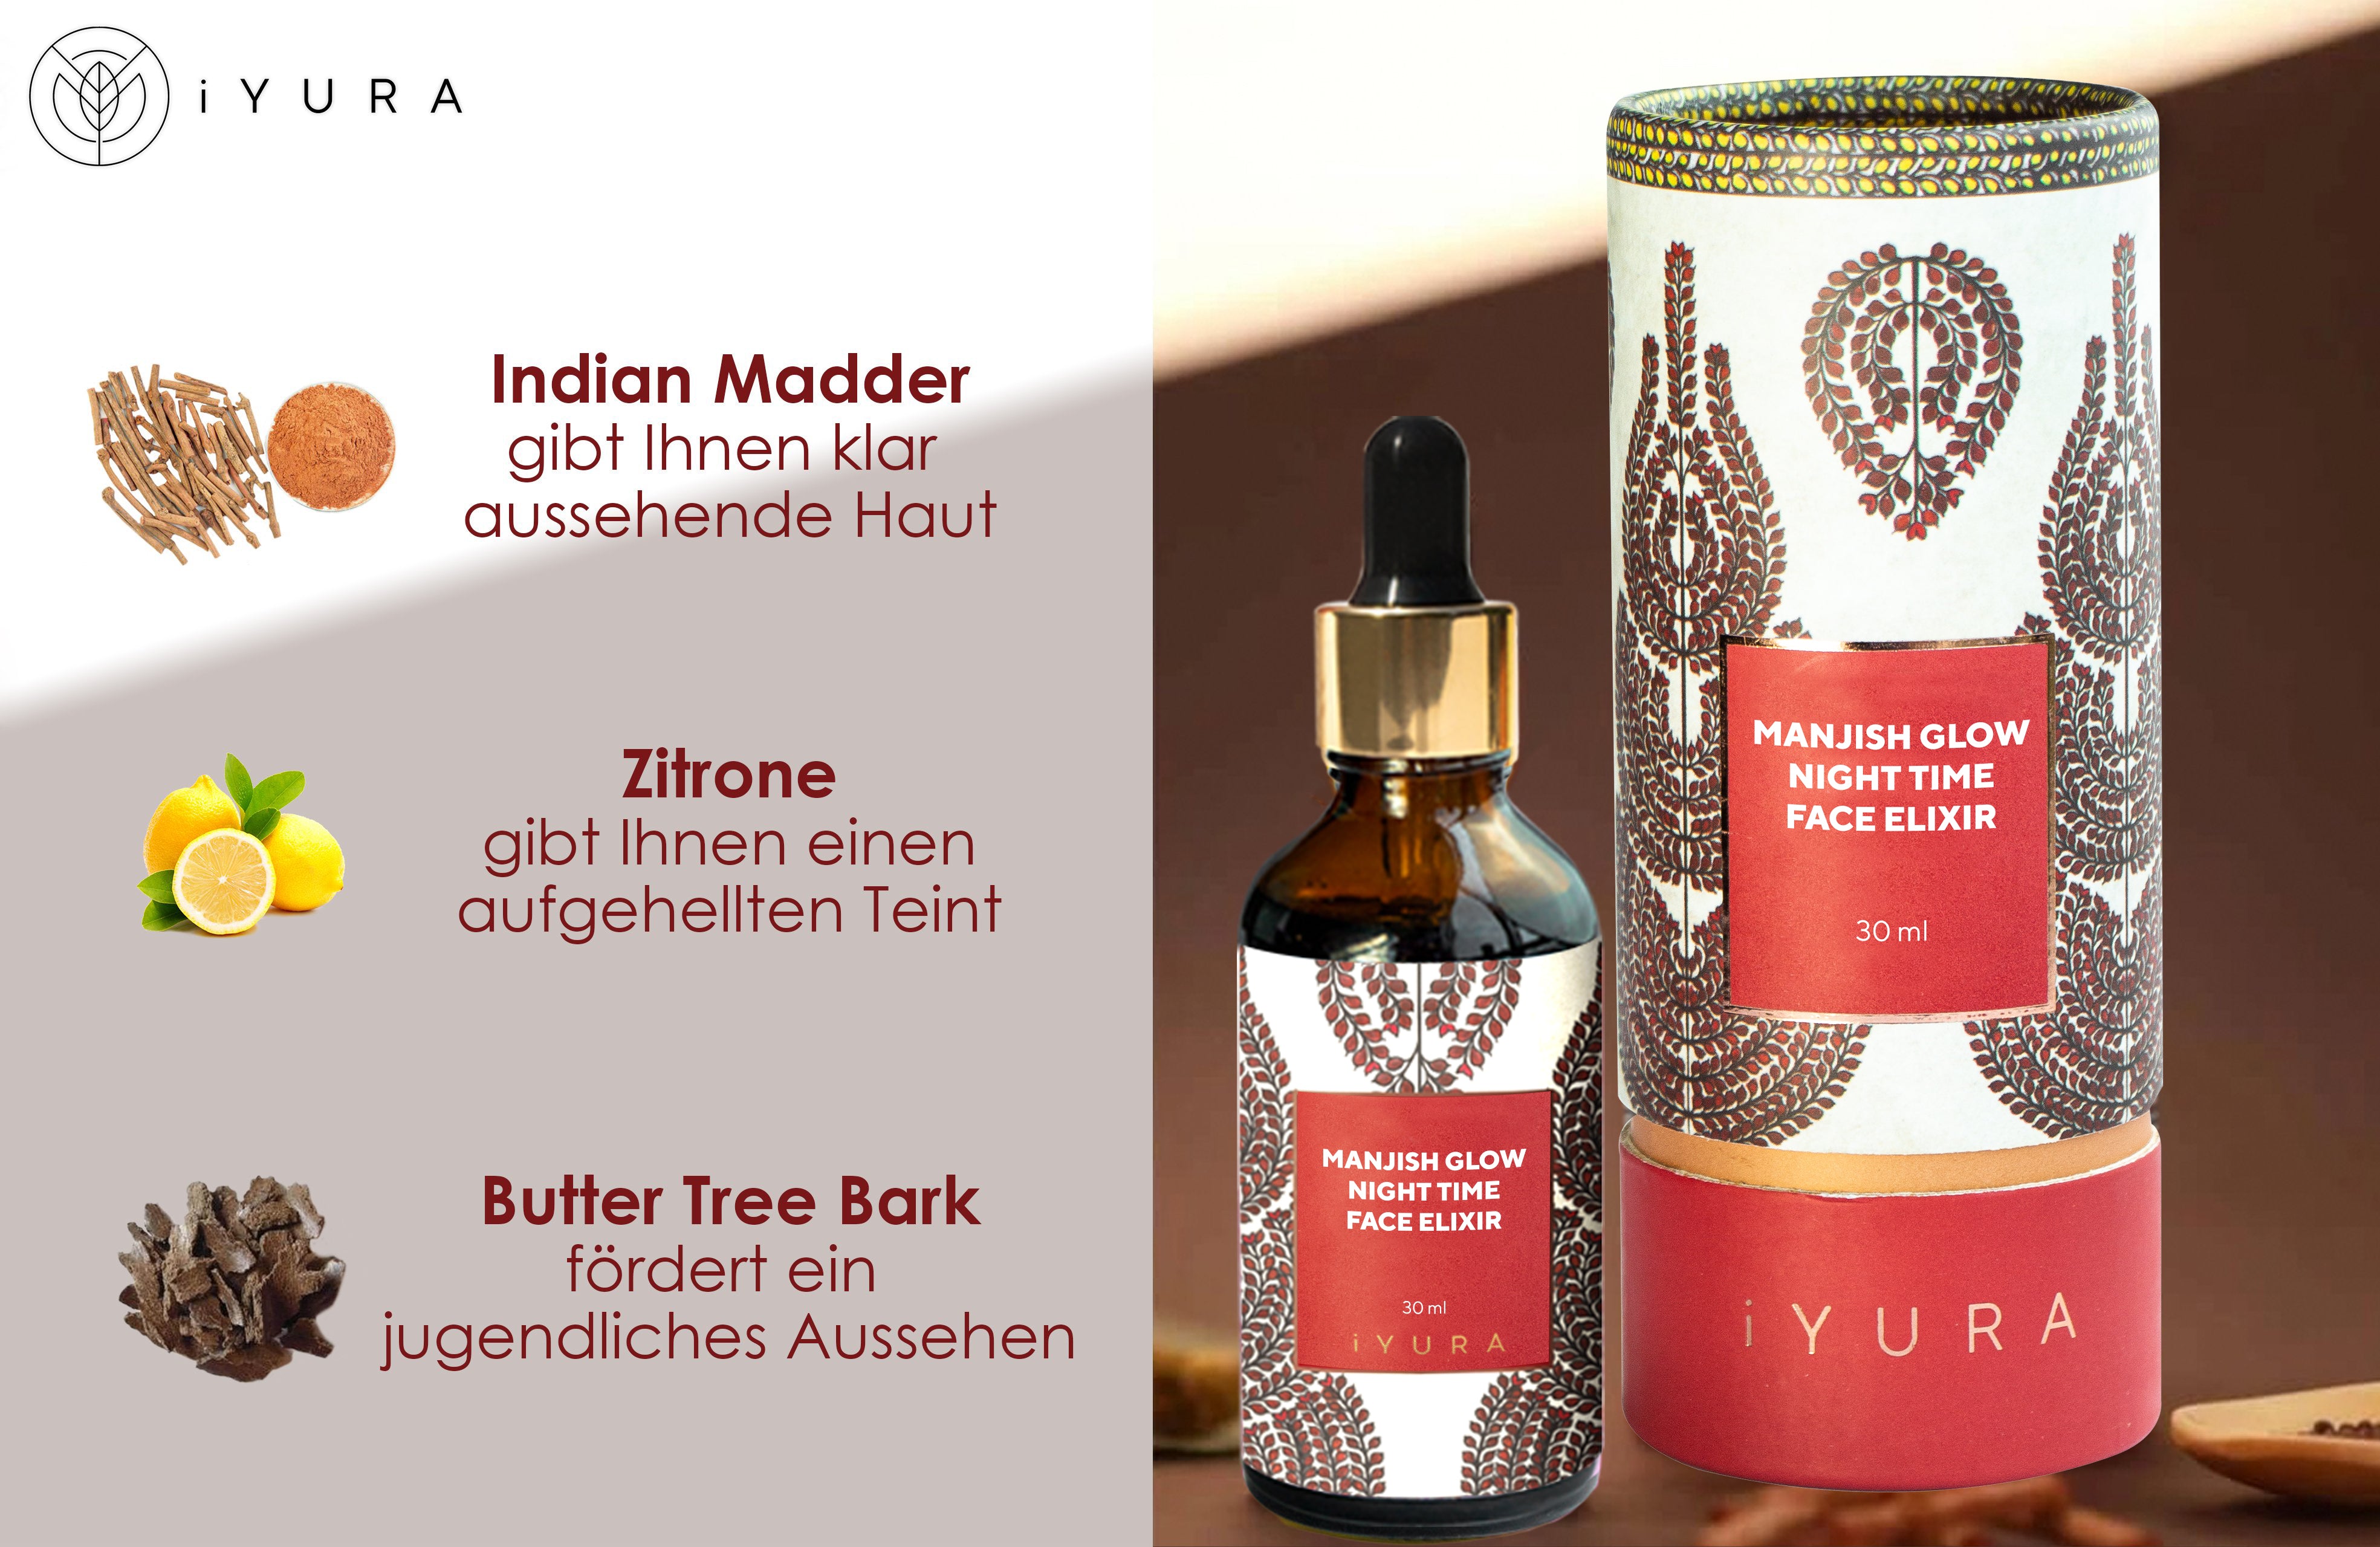 3 Key Ingredients: Indian Madder - gives you clear-looking skin; Lemon - gives you a brightened complexion & Butter Tree Bark - promotes a youthful appearance shown with a bottle of iYURA Manjish Glow Elixir